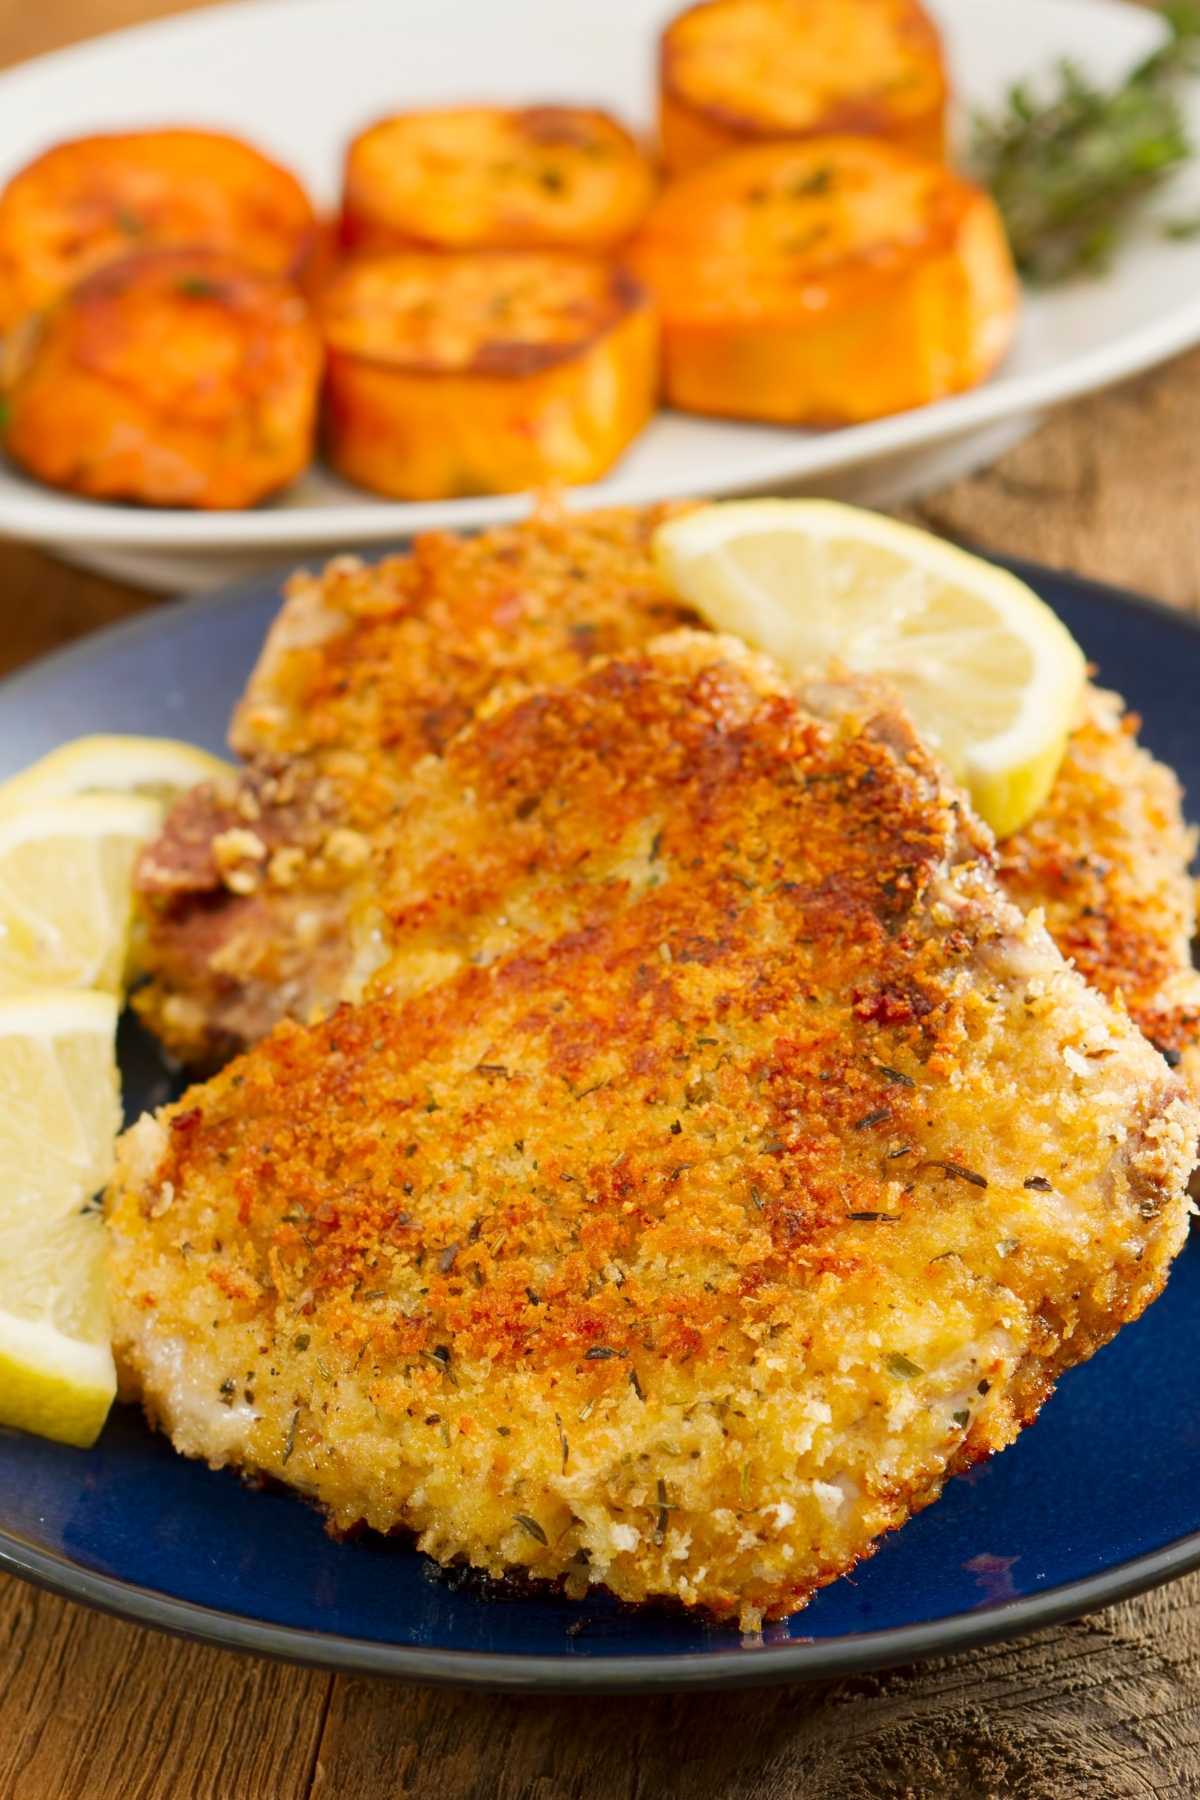 These parmesan pork chops are perfectly moist and tender on the inside and crispy on the outside. They’re super easy to make and are ready to eat in under an hour.